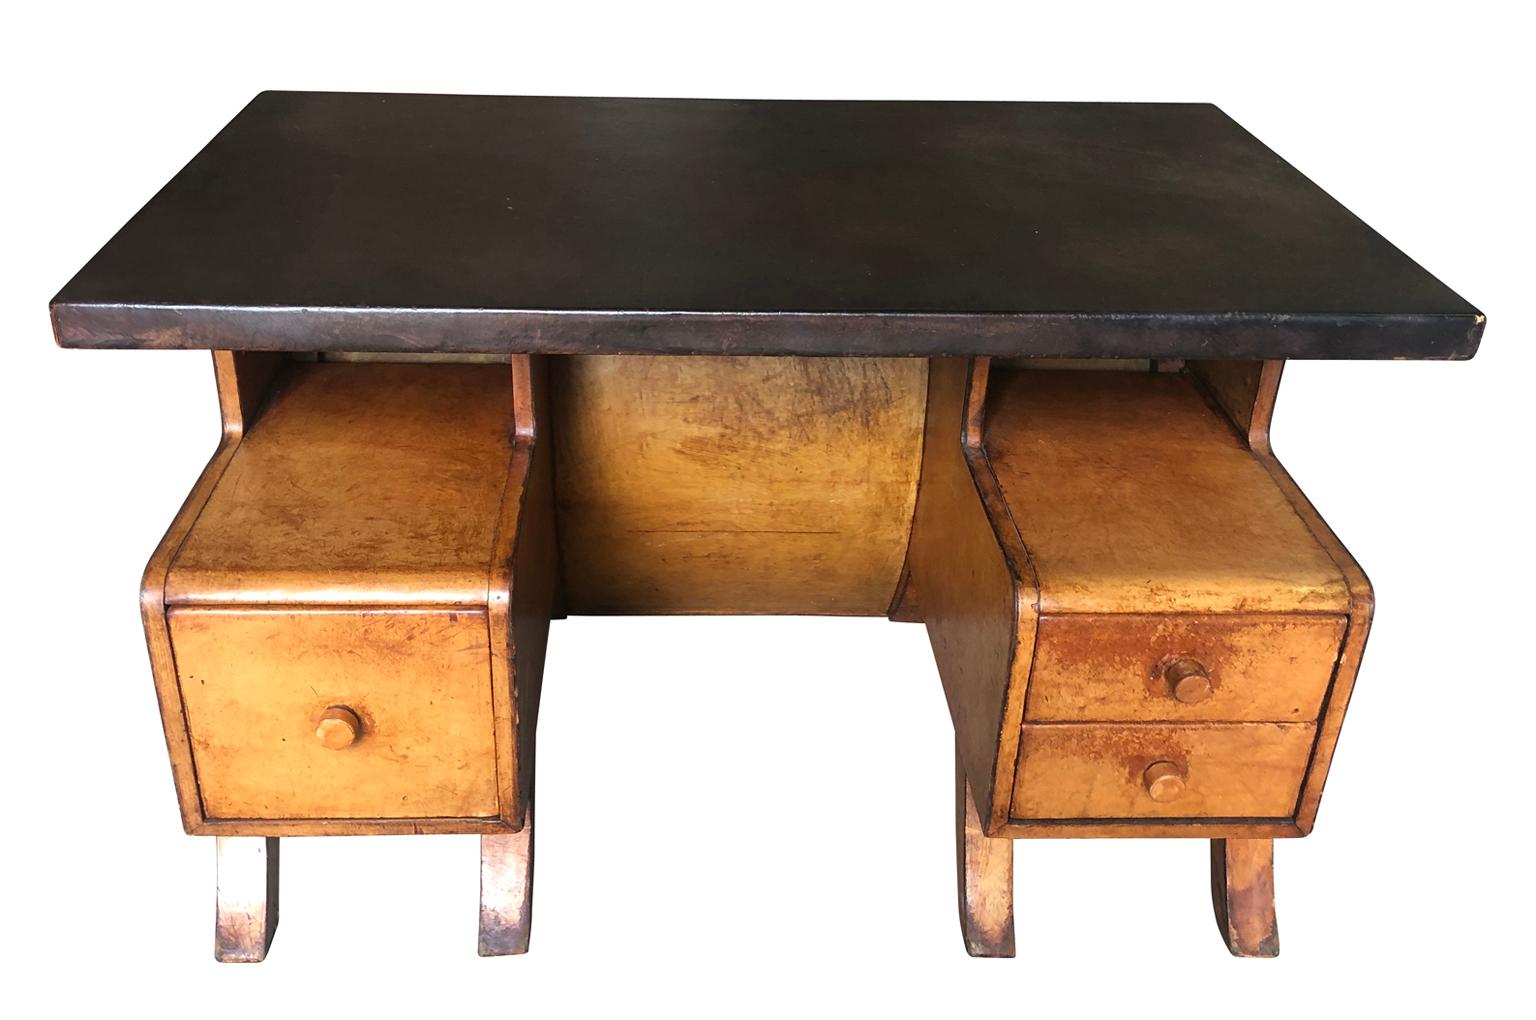 A very sensational French Art Deco desk clad in wonderful leather. Very chic and wonderful design with three drawers.